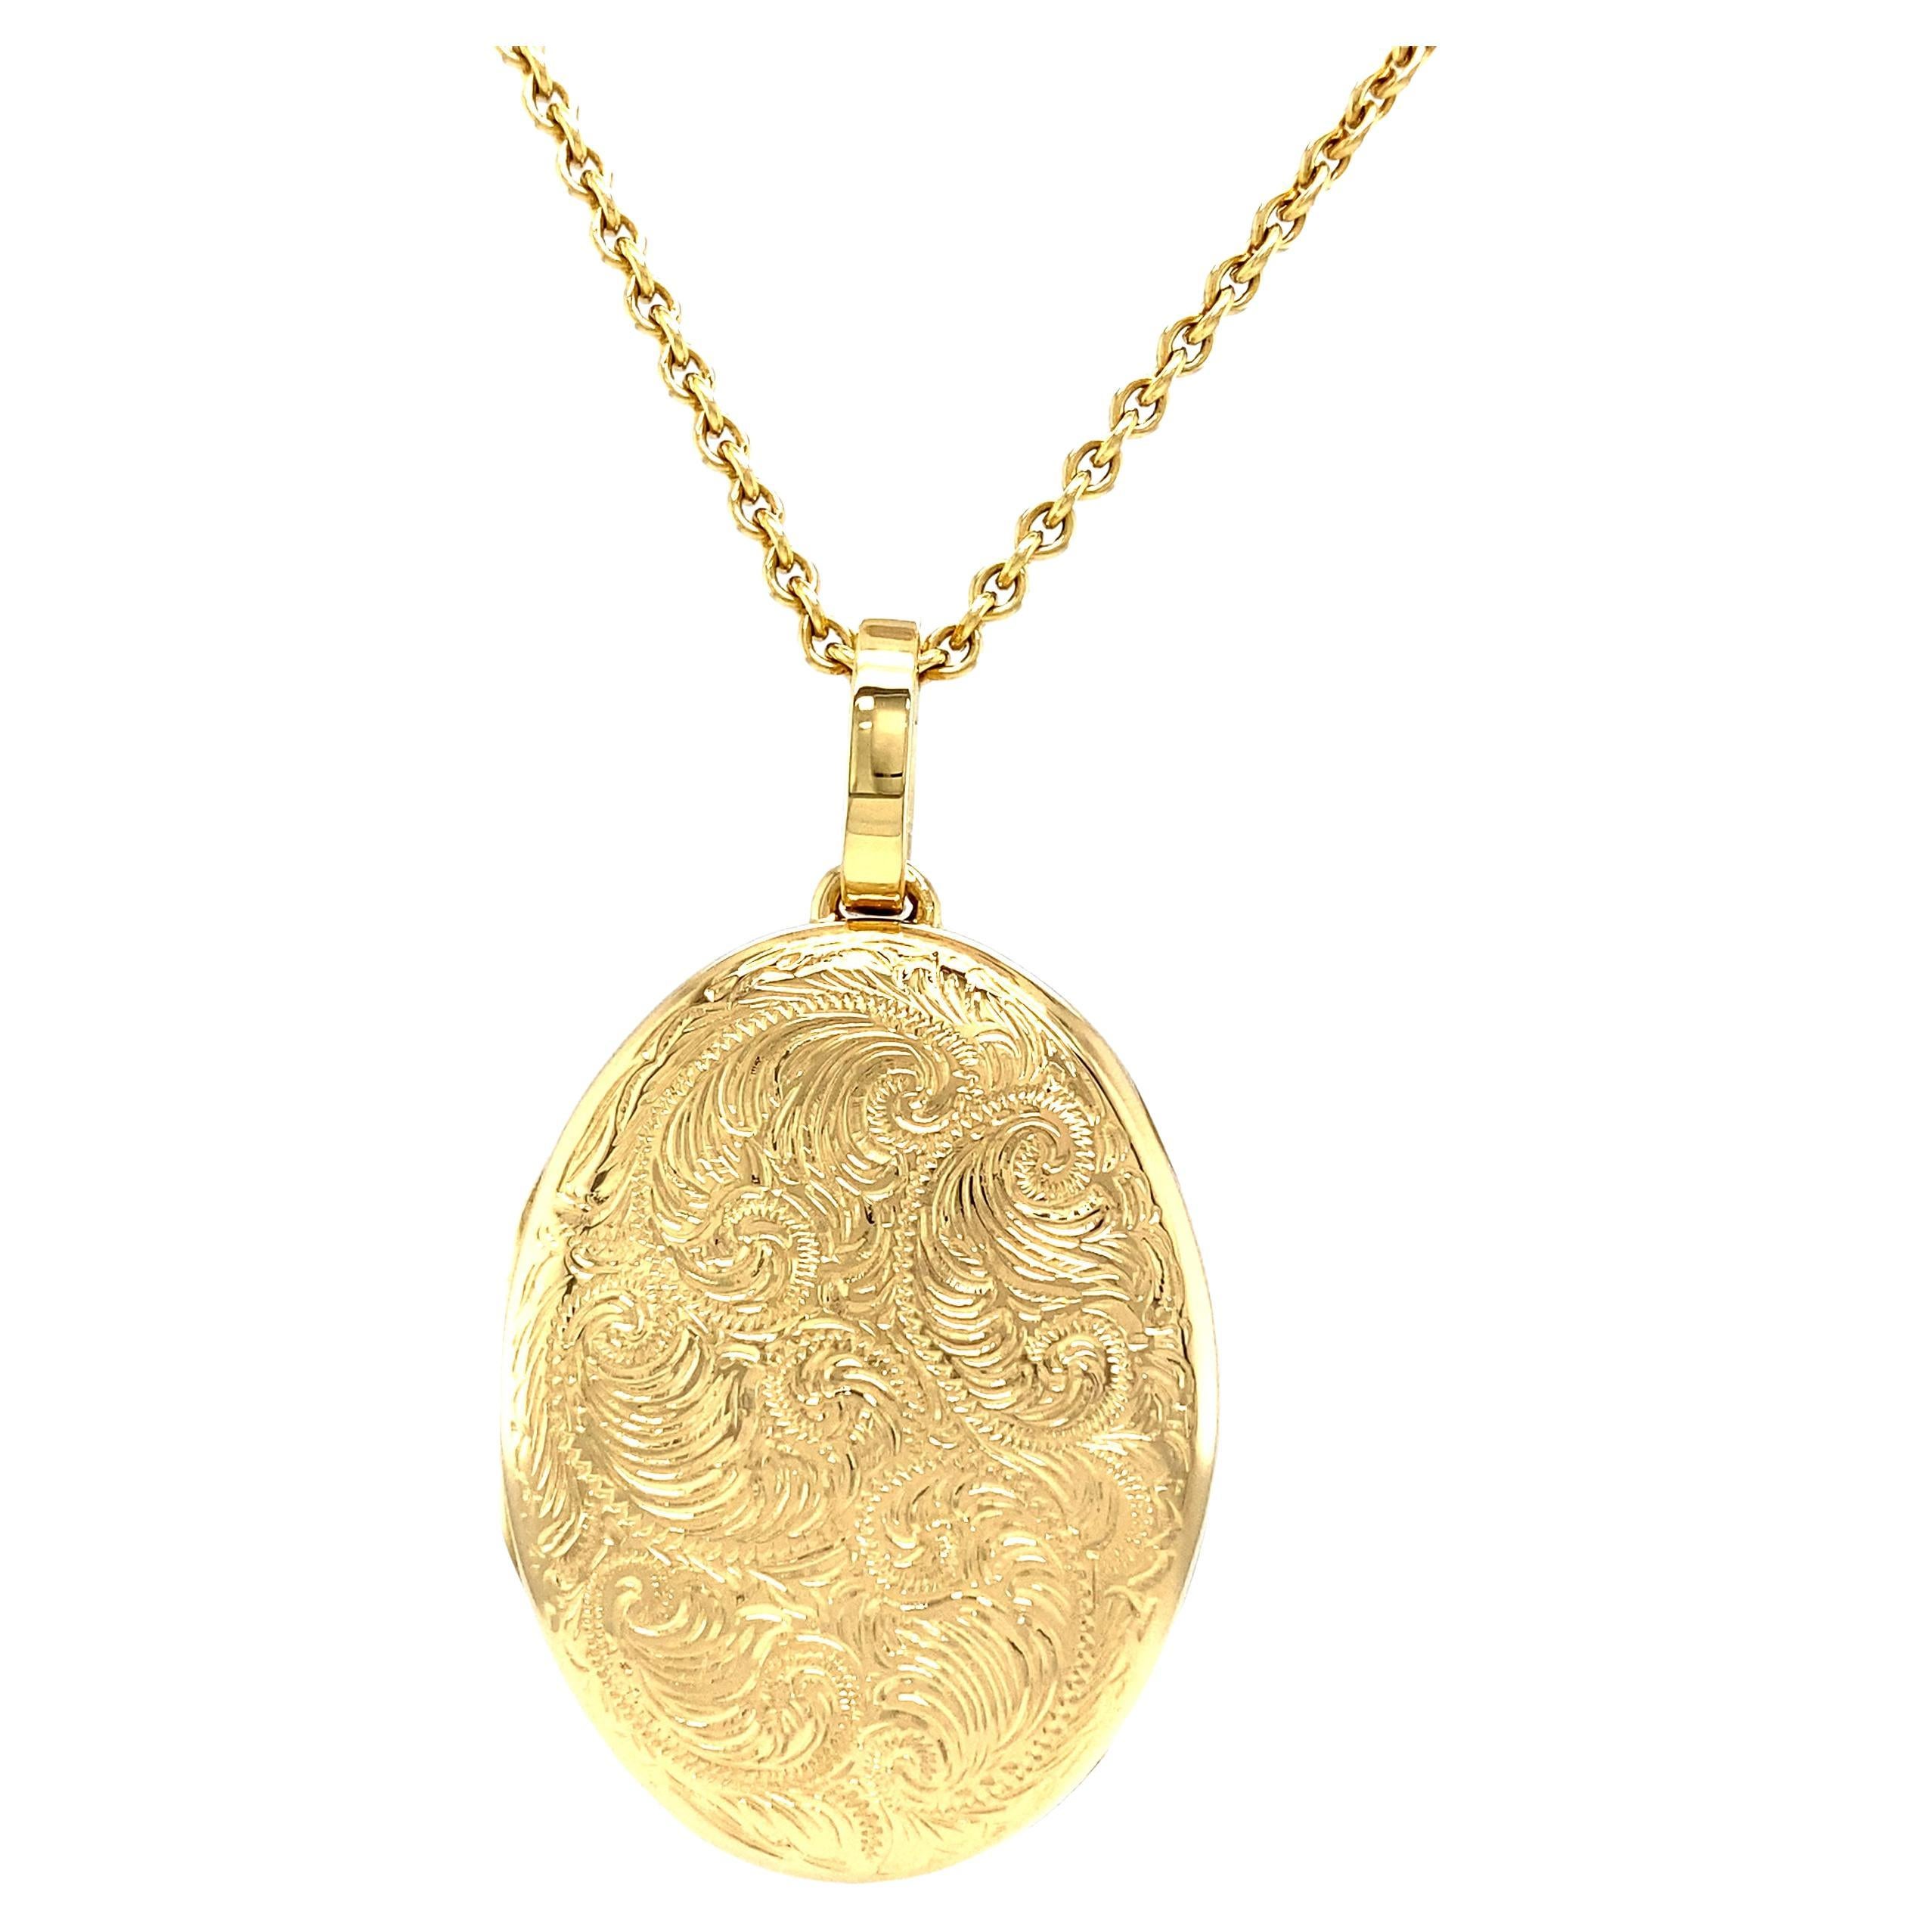 Victor Mayer oval locket pendant, 18k yellow gold, Hallmark Collection, scroll engraving by hand, measurements app. 32.0 mm x 23.0 mm

About the creator Victor Mayer
Victor Mayer is internationally renowned for elegant timeless designs and